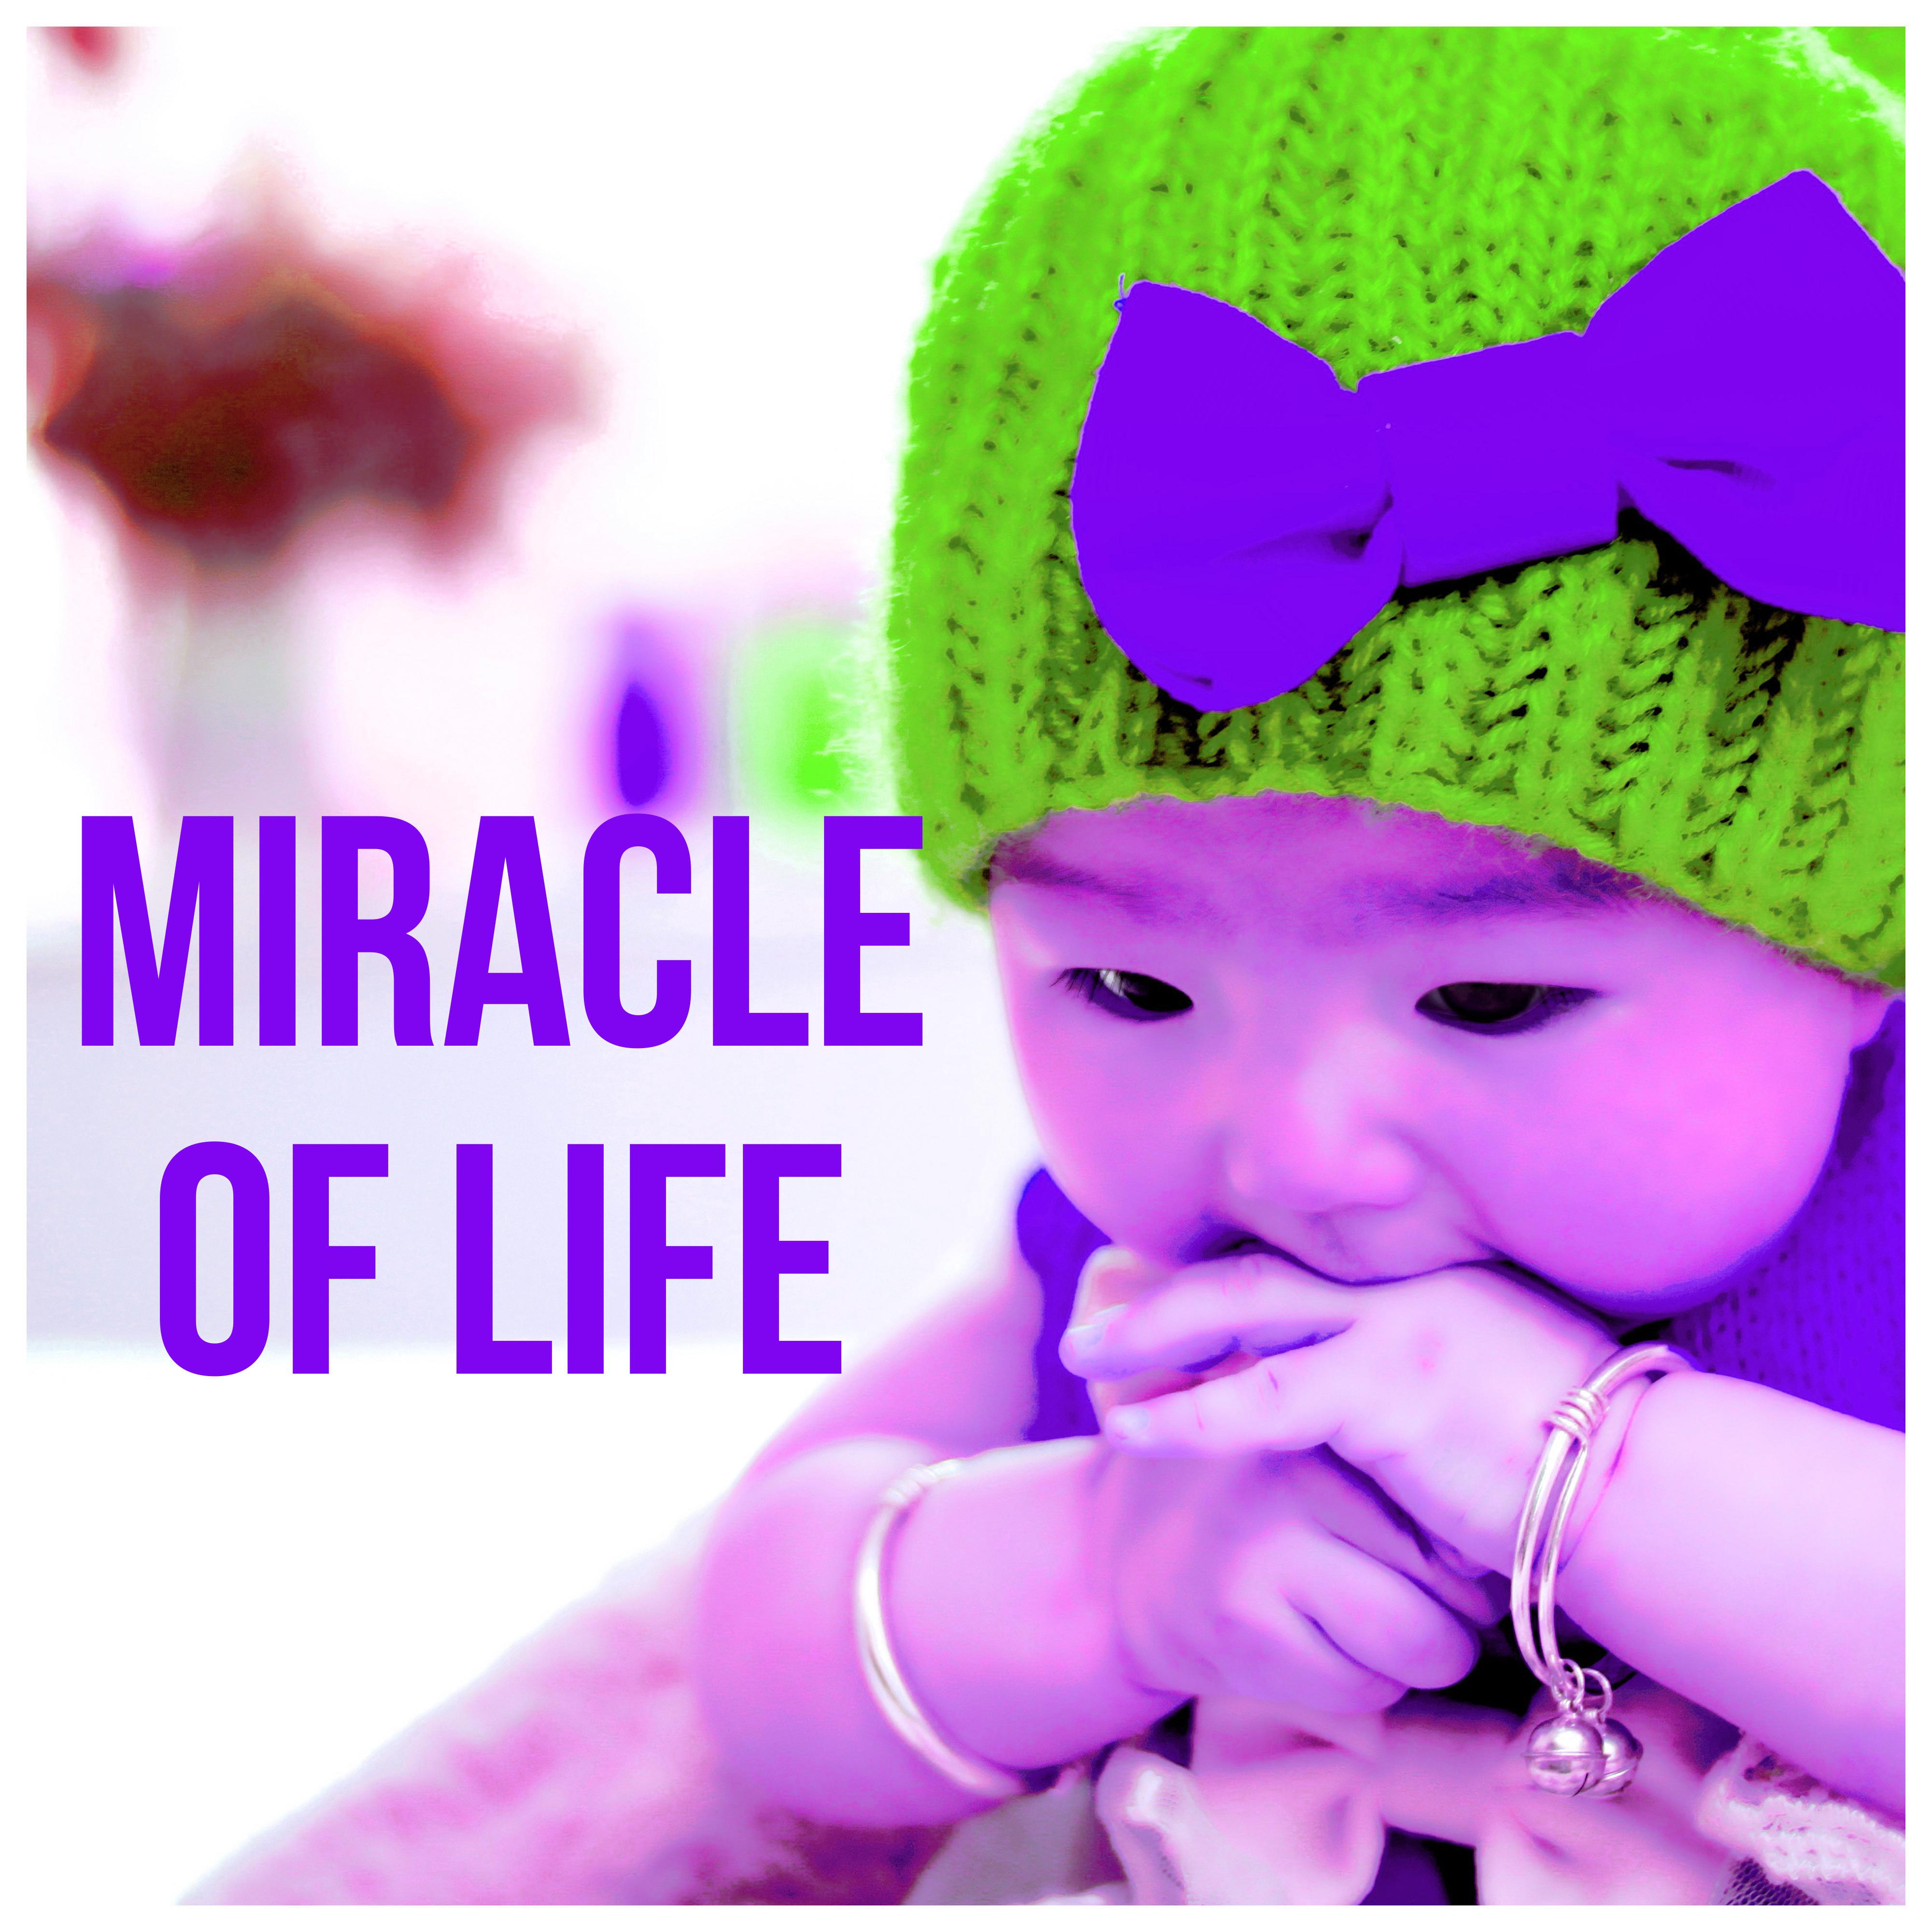 Miracle of Life - Soothing Sounds of Nature for Infants, Babies, Calm & Peaceful Music for Your Child to Help Sleep Through the Night, White Noise